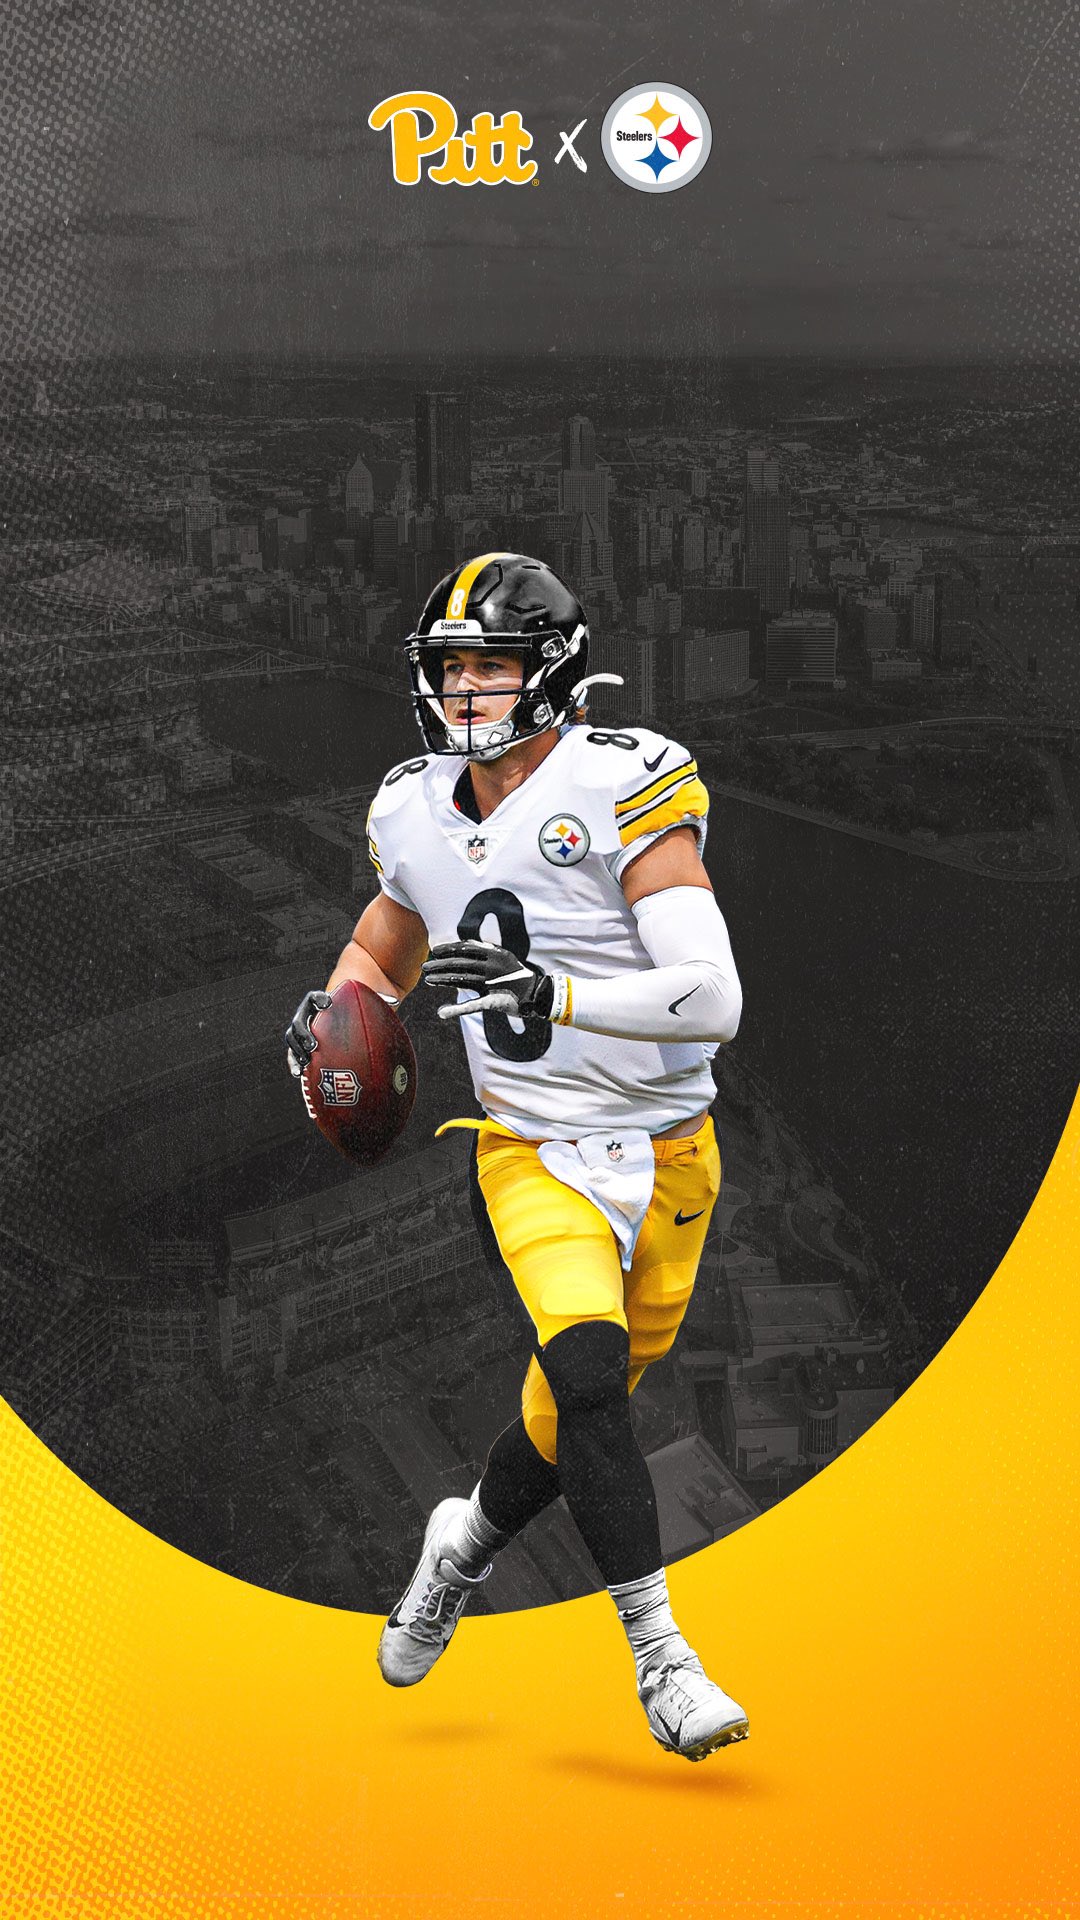 Pittsburgh Steelers wallpaper by JeremyNeal1 - Download on ZEDGE